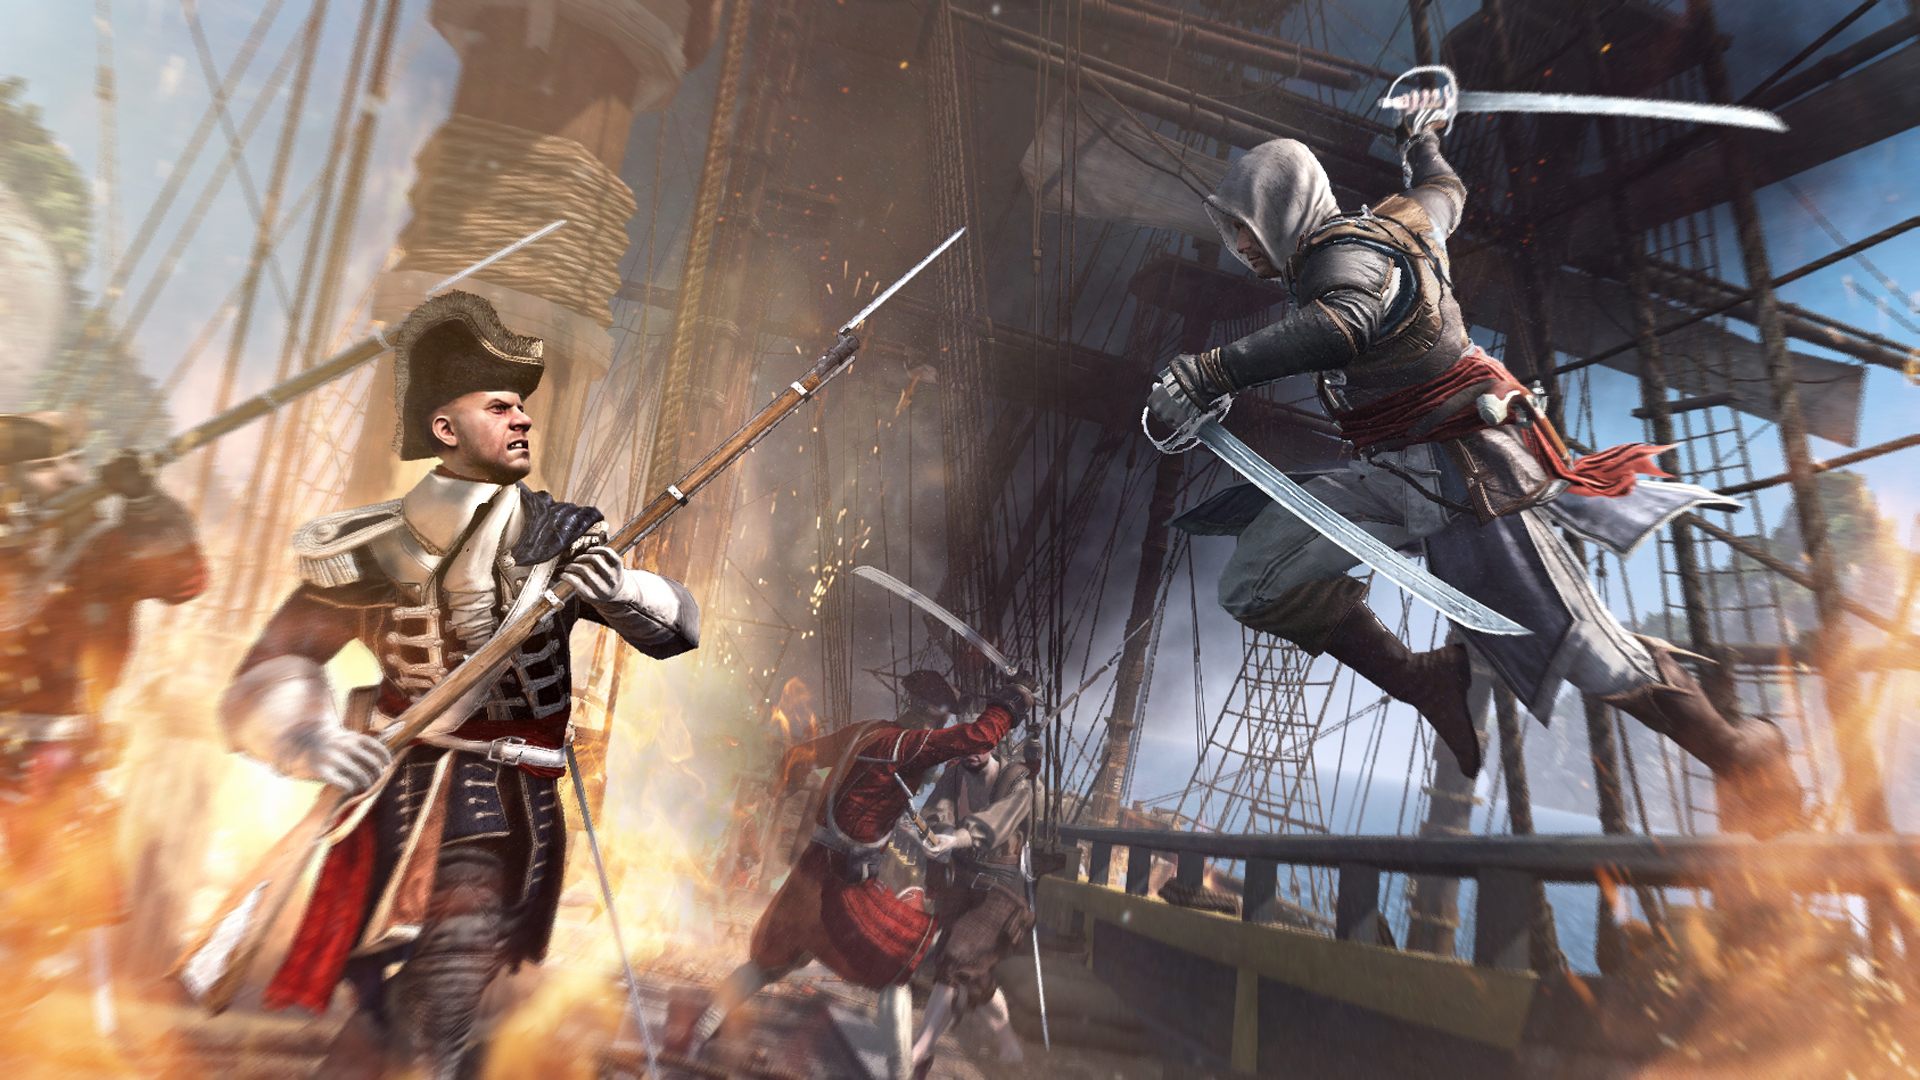 best Assassin's Creed games: Protagonist Edward Kenway jumping from a ship at a soldier, his blade raised